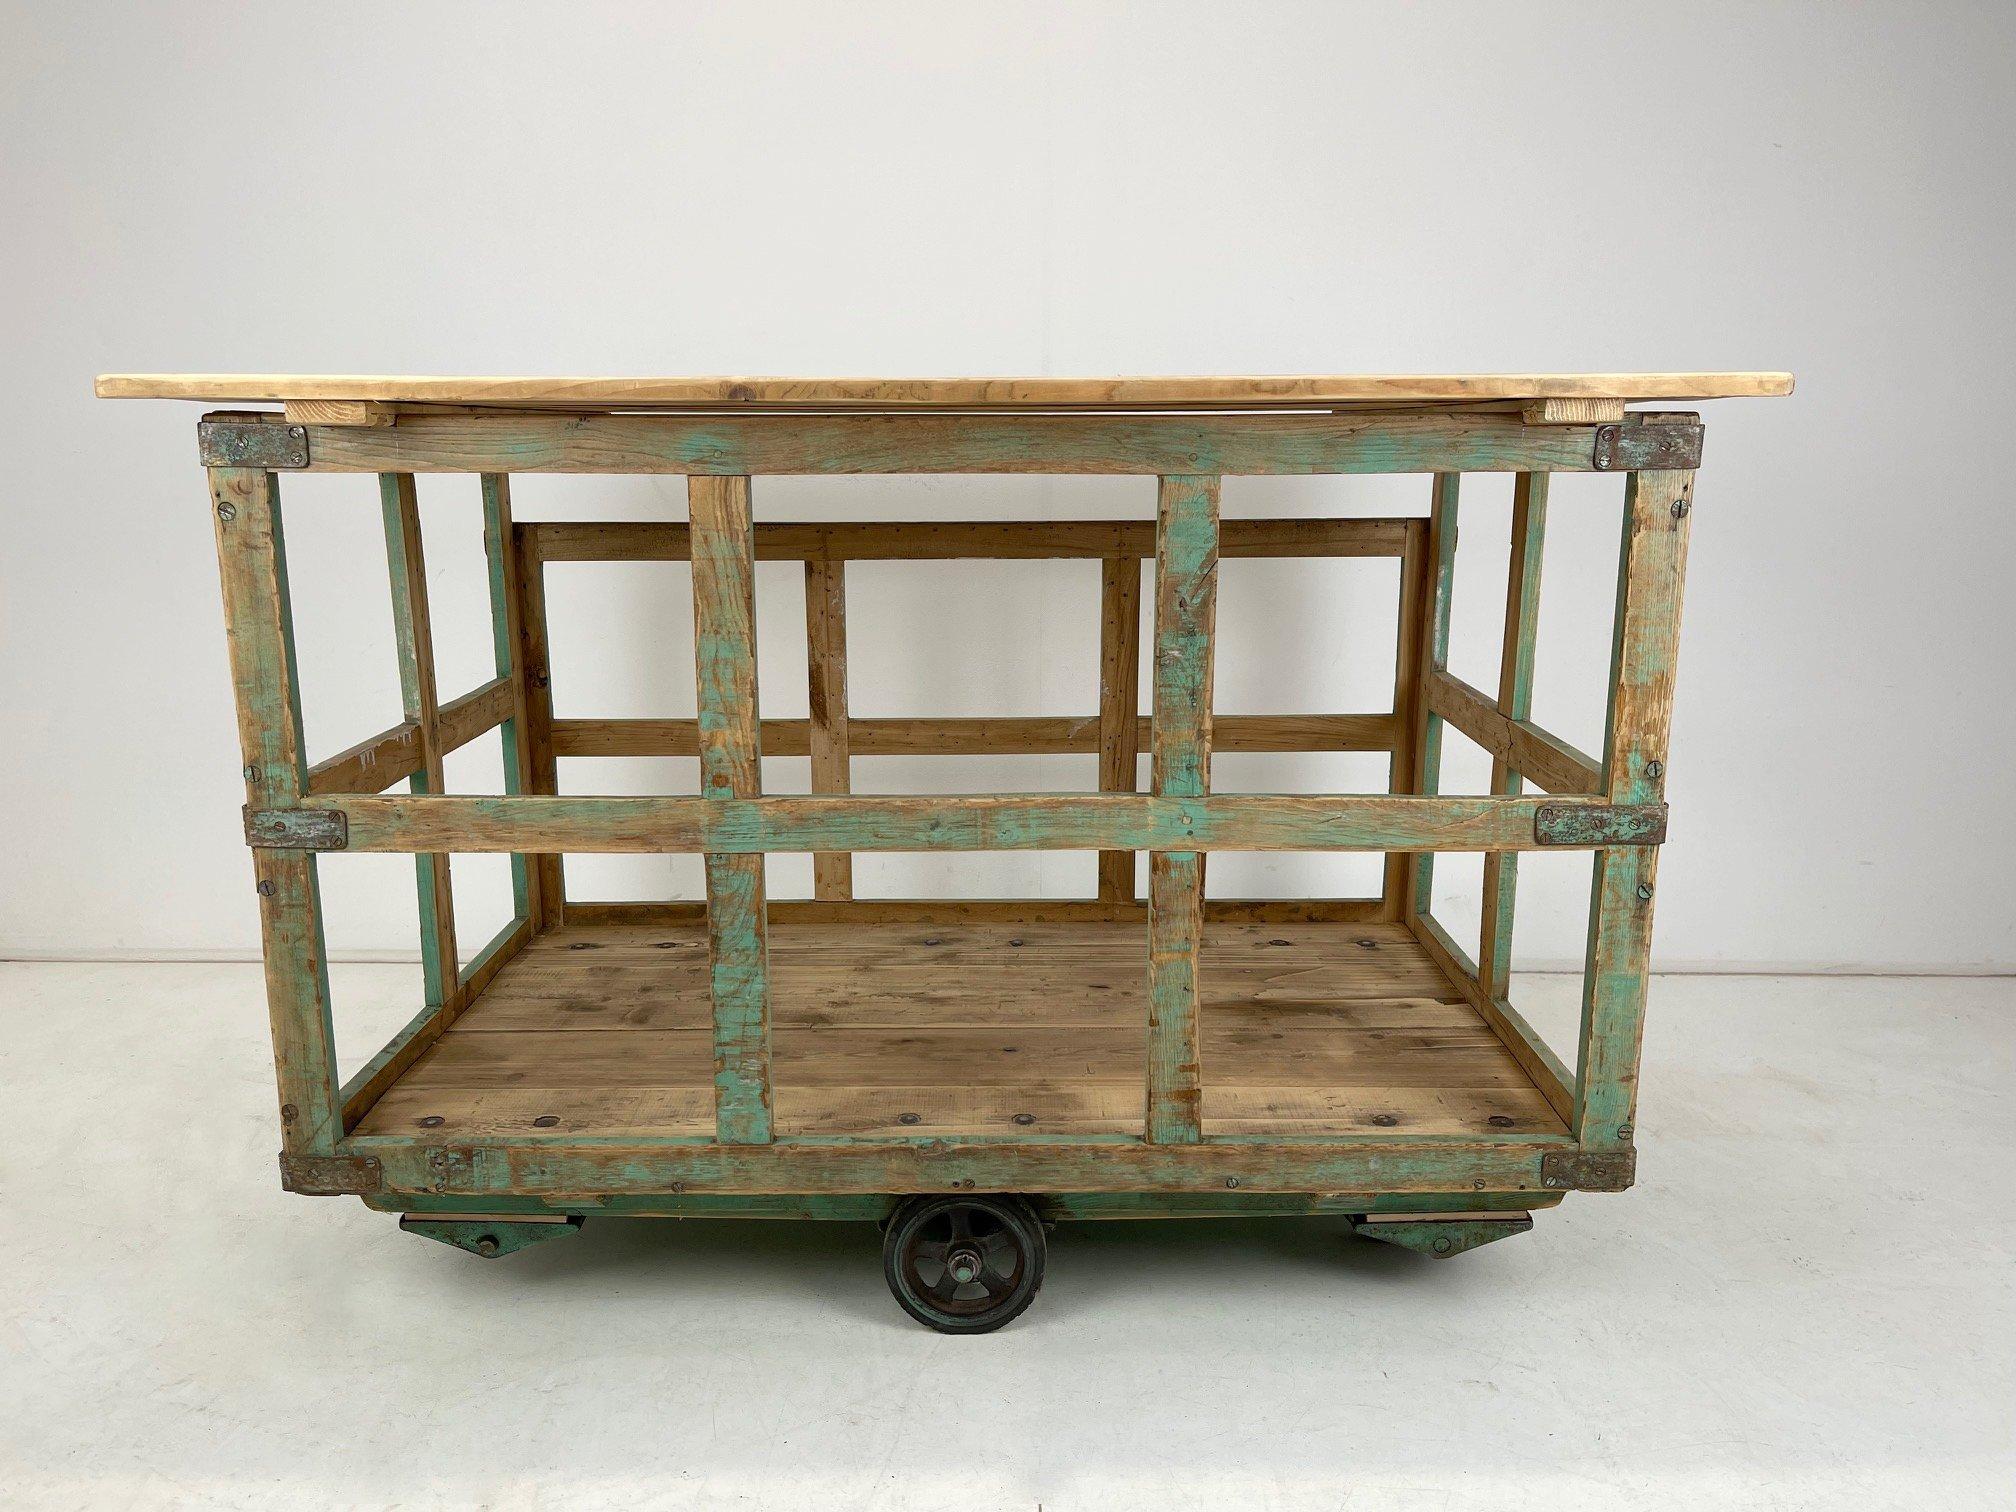 Original vintage industrial large cart on wheels. All parts are thoroughly cleaned, sanded and waxed. The top is removable, allowing the cart to also be the perfect place for storage or display if desired.